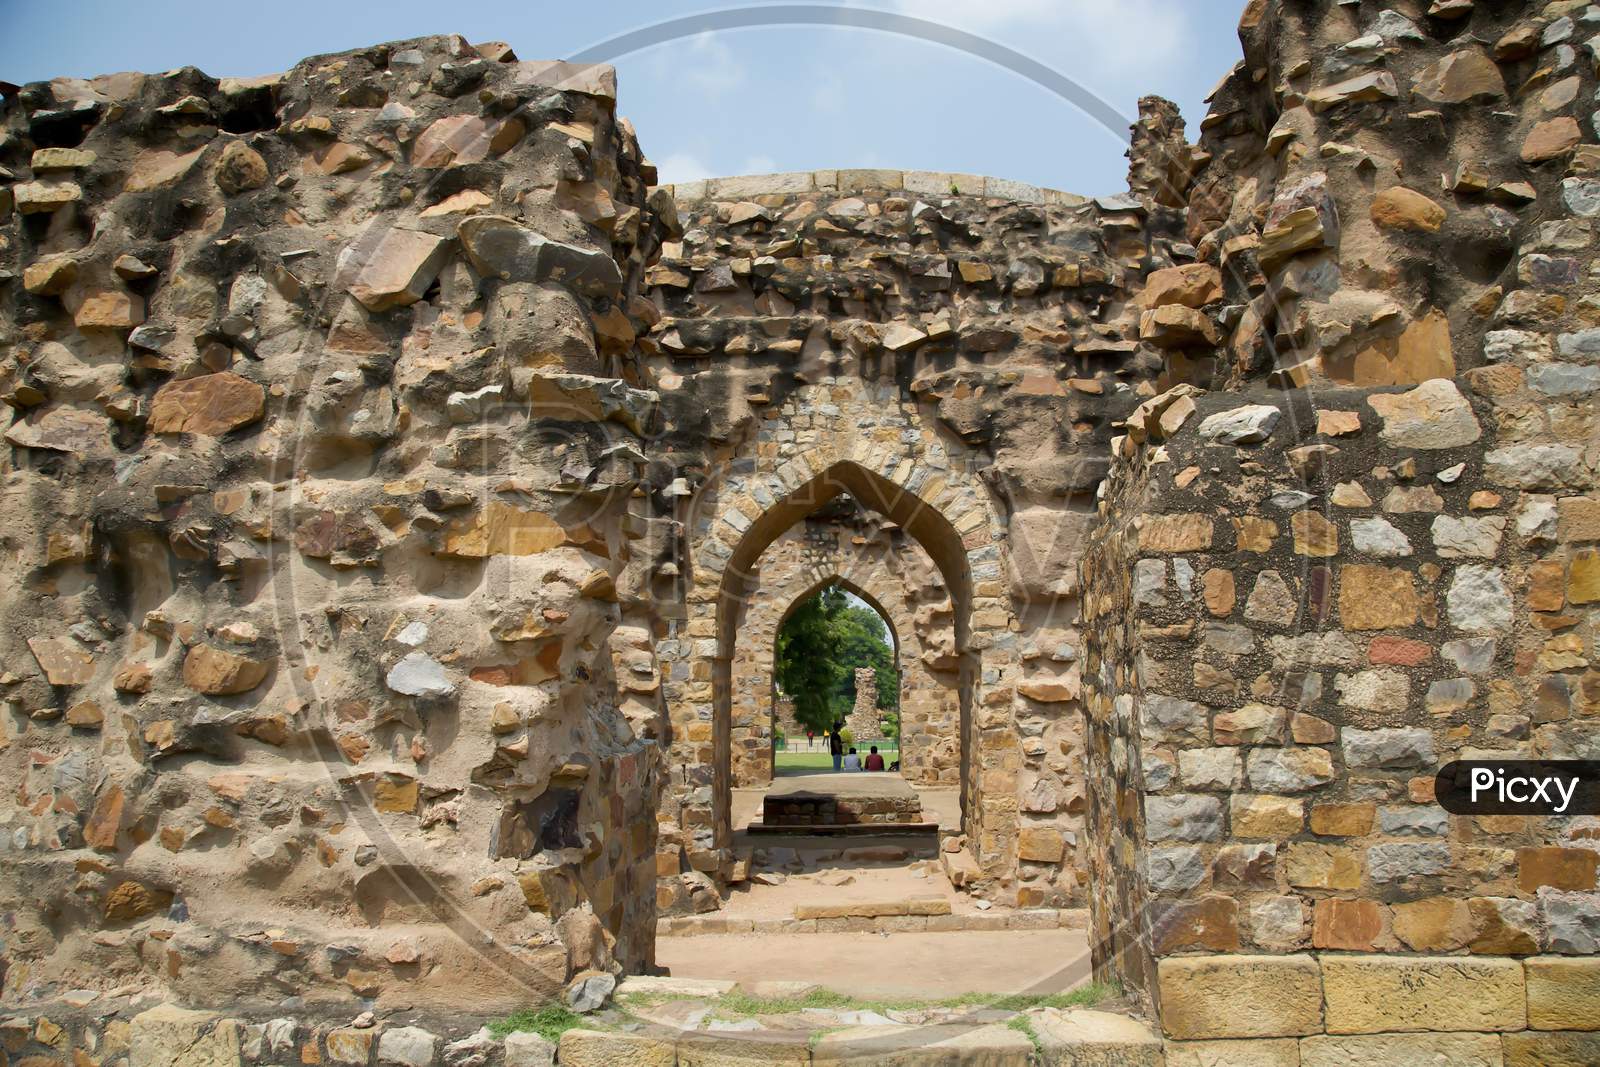 Remains Of Walls And Arches At The Qutub Complex In India. Looking Through Archways Of Ruined Buildings Made Of Stone.